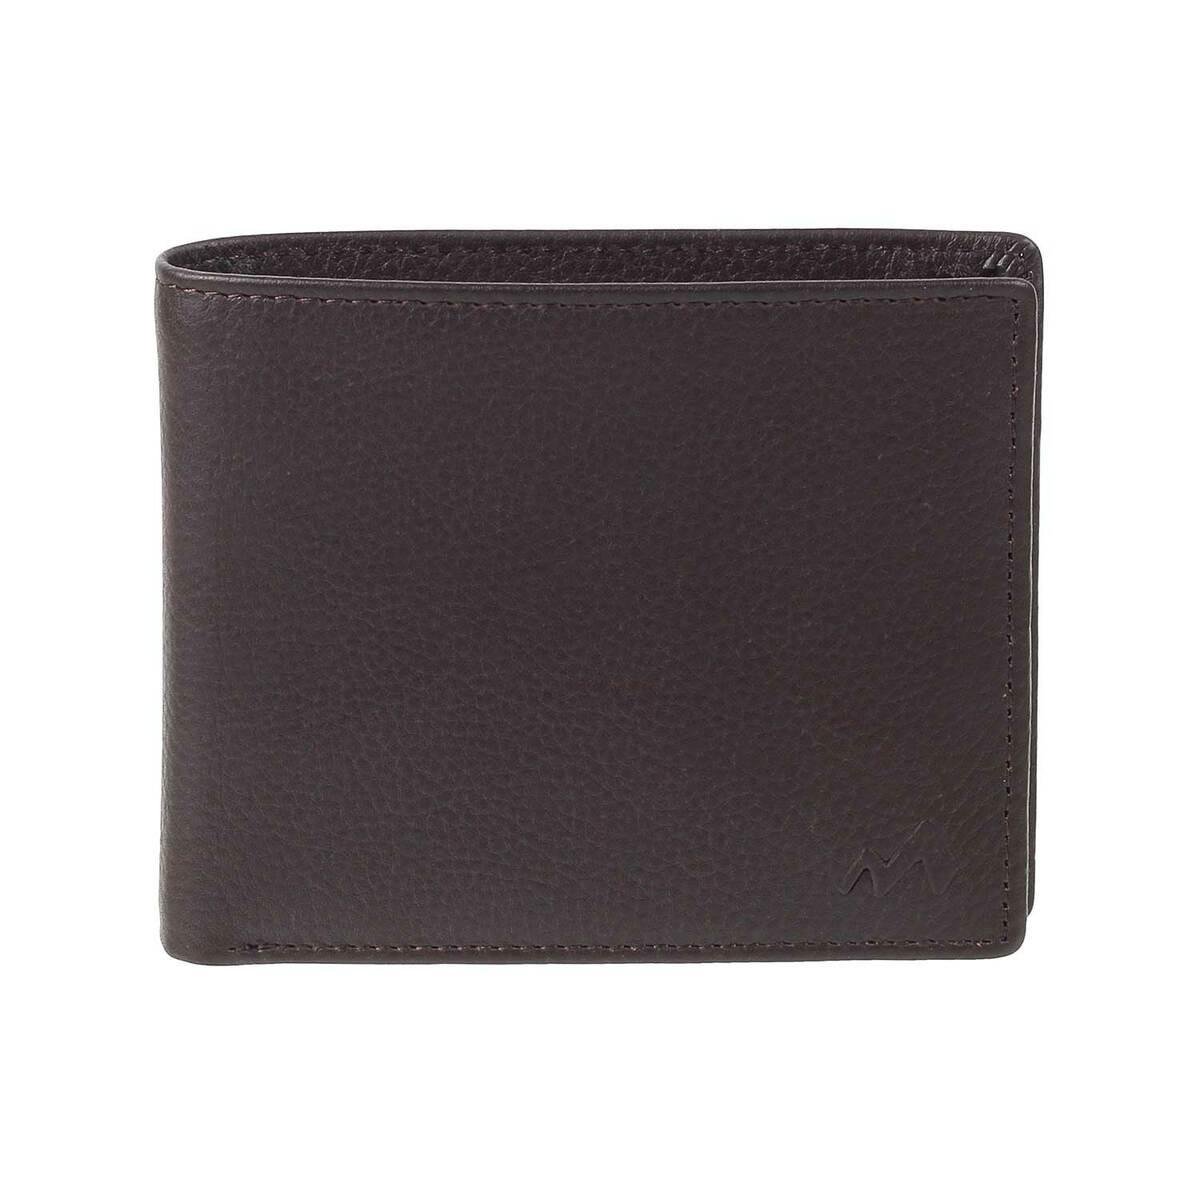 Baellerry High Quality Men's Leather Clutch Wallet | Leather Wallet for Men